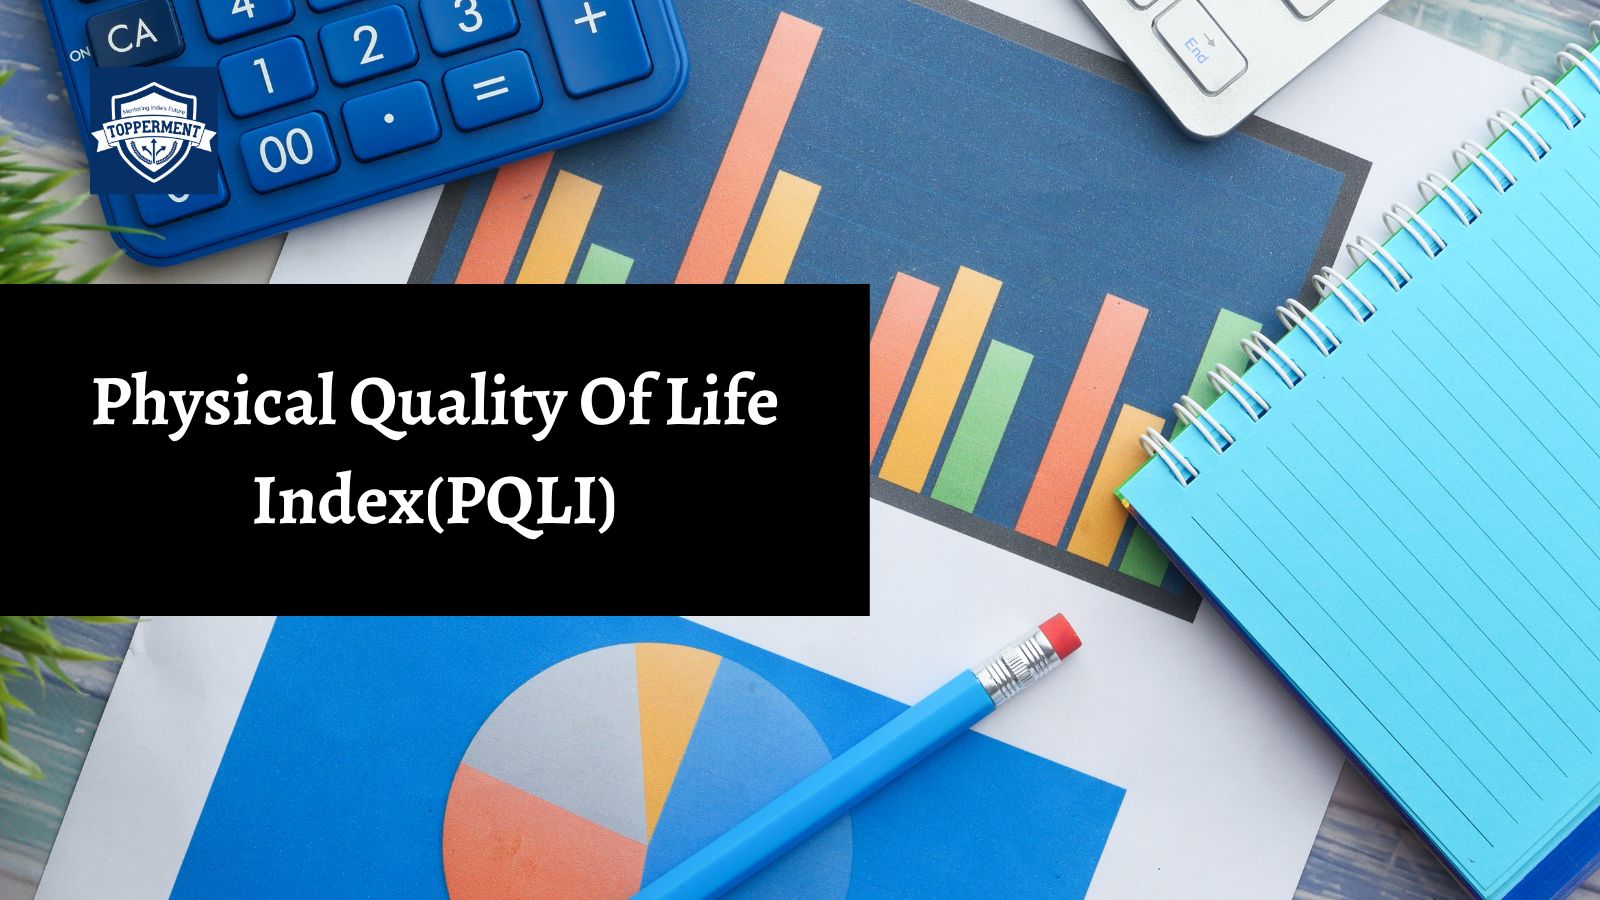 What-Is-Physical-Quality-Of-Life-IndexPQLI-Best-UPSC-IAS-Coaching-For-Mentorship-And-Guidance